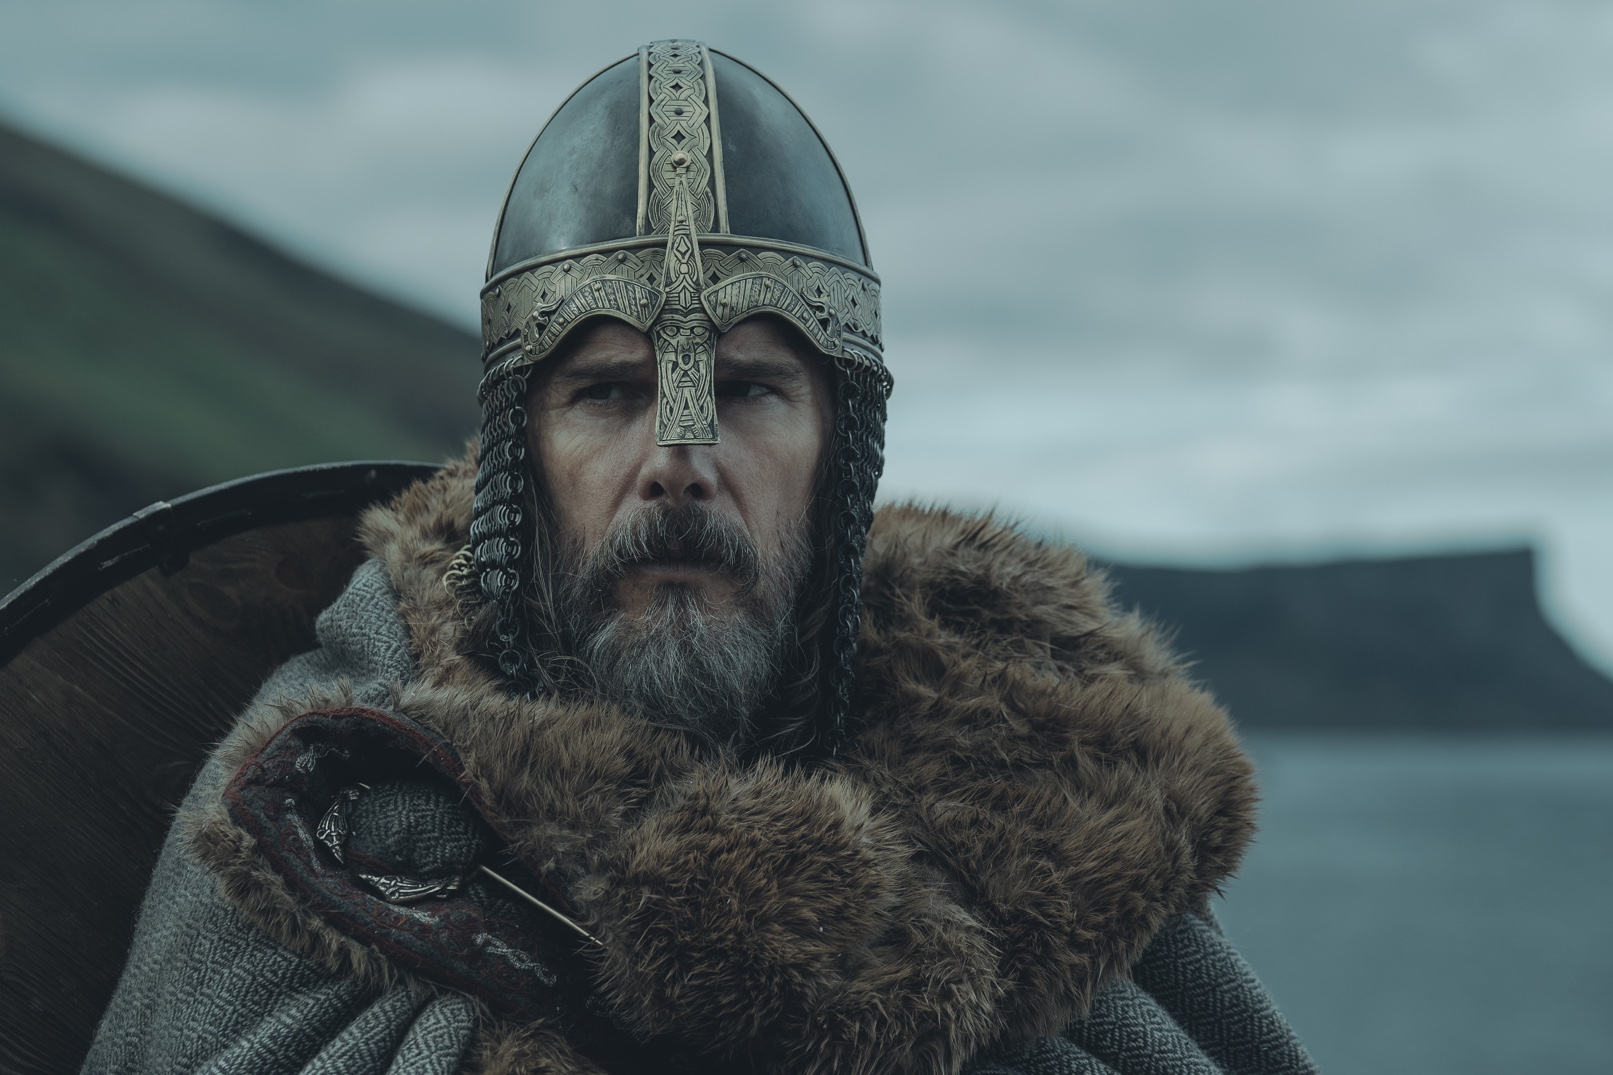 Ethan Hawke as King Aurvandill War-Raven, Amleth's father (image courtesy of Focus Features)